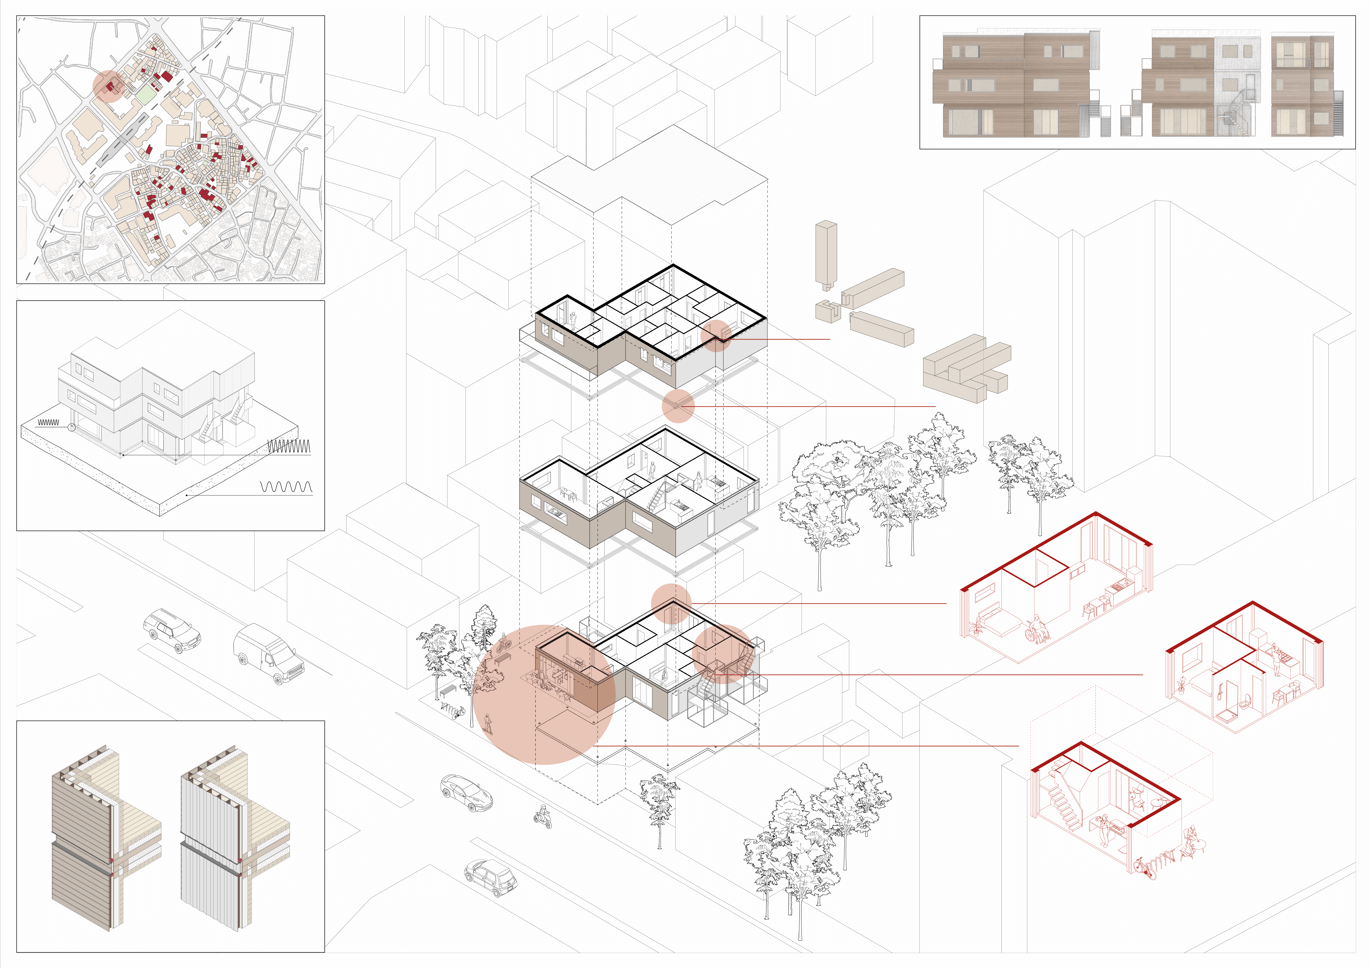 Exploded axonometric drawing of the scheme, along with some illustrations of the façade, site map, seismic diagram and materiality.